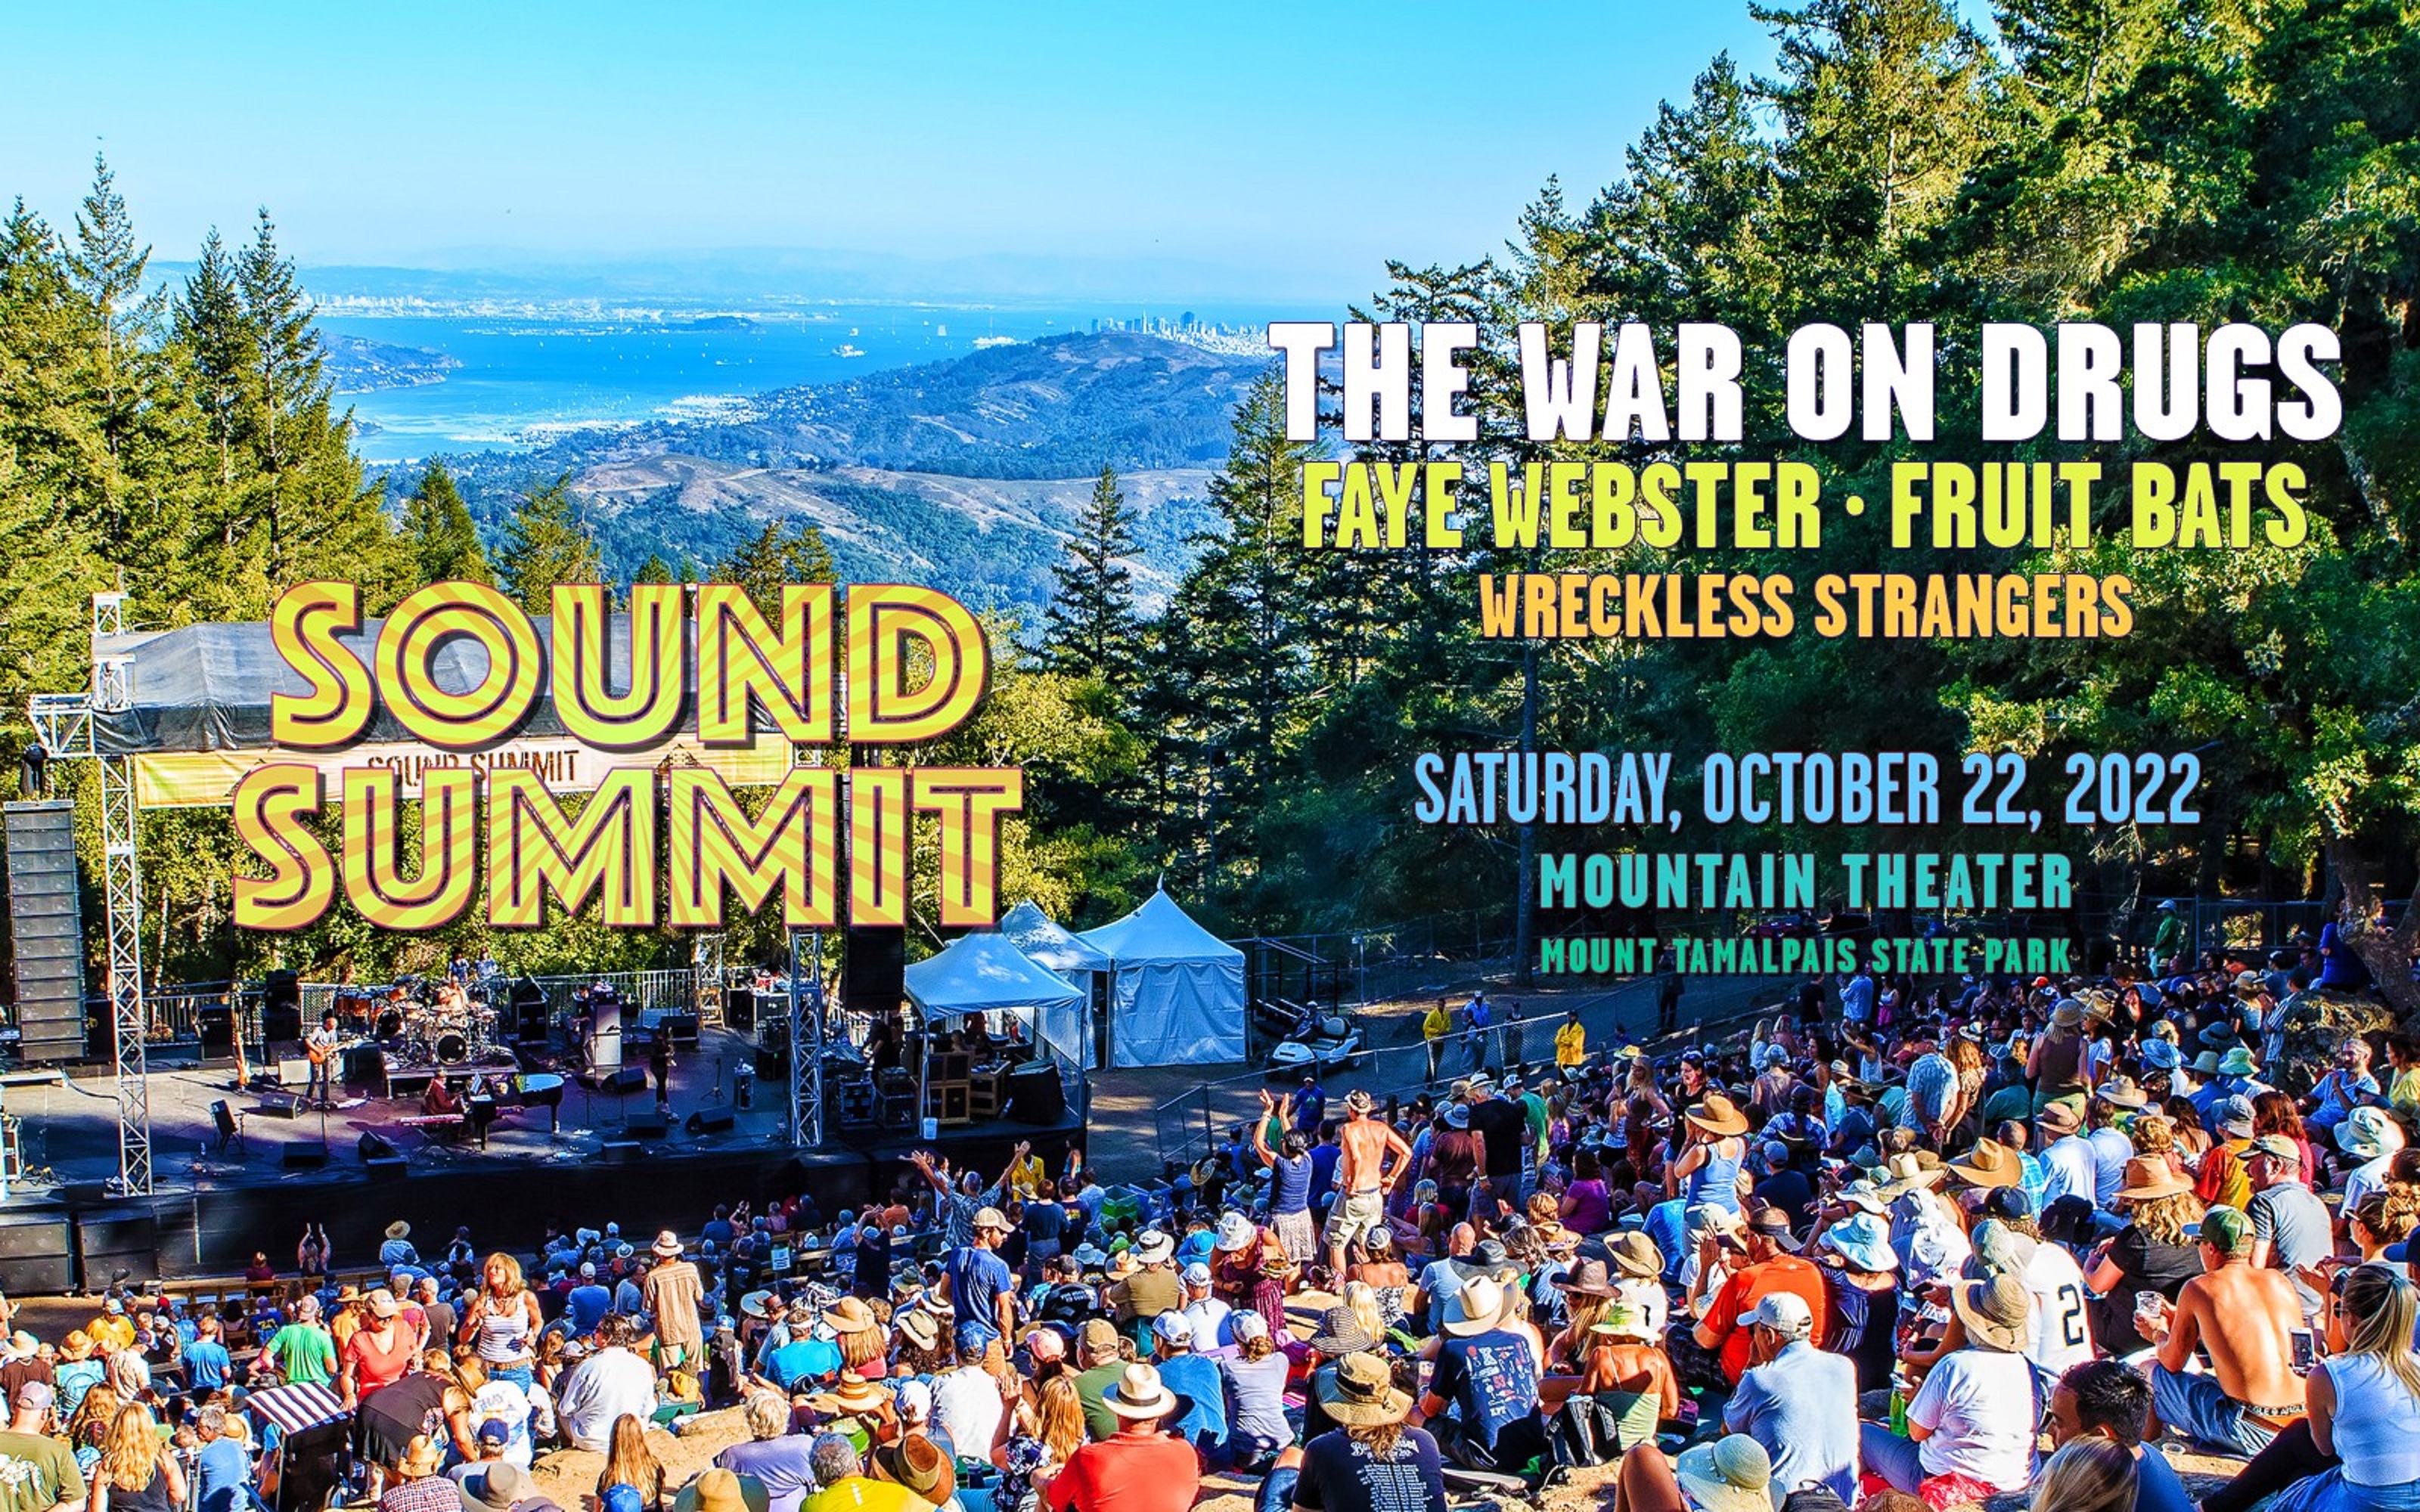 Sound Summit Returns to Mount Tam for Annual Celebration Saturday, October 22